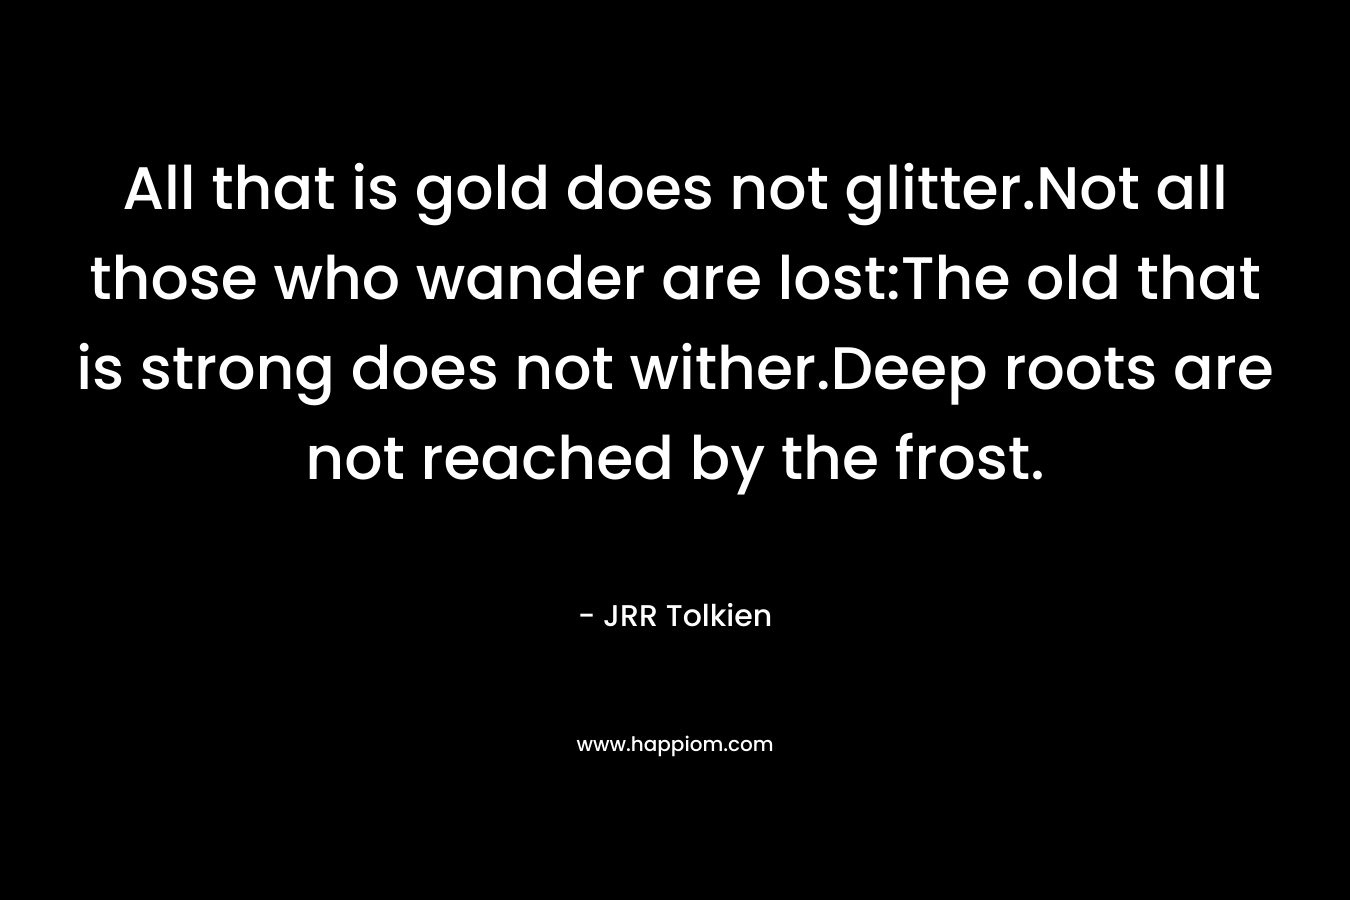 All that is gold does not glitter.Not all those who wander are lost:The old that is strong does not wither.Deep roots are not reached by the frost.